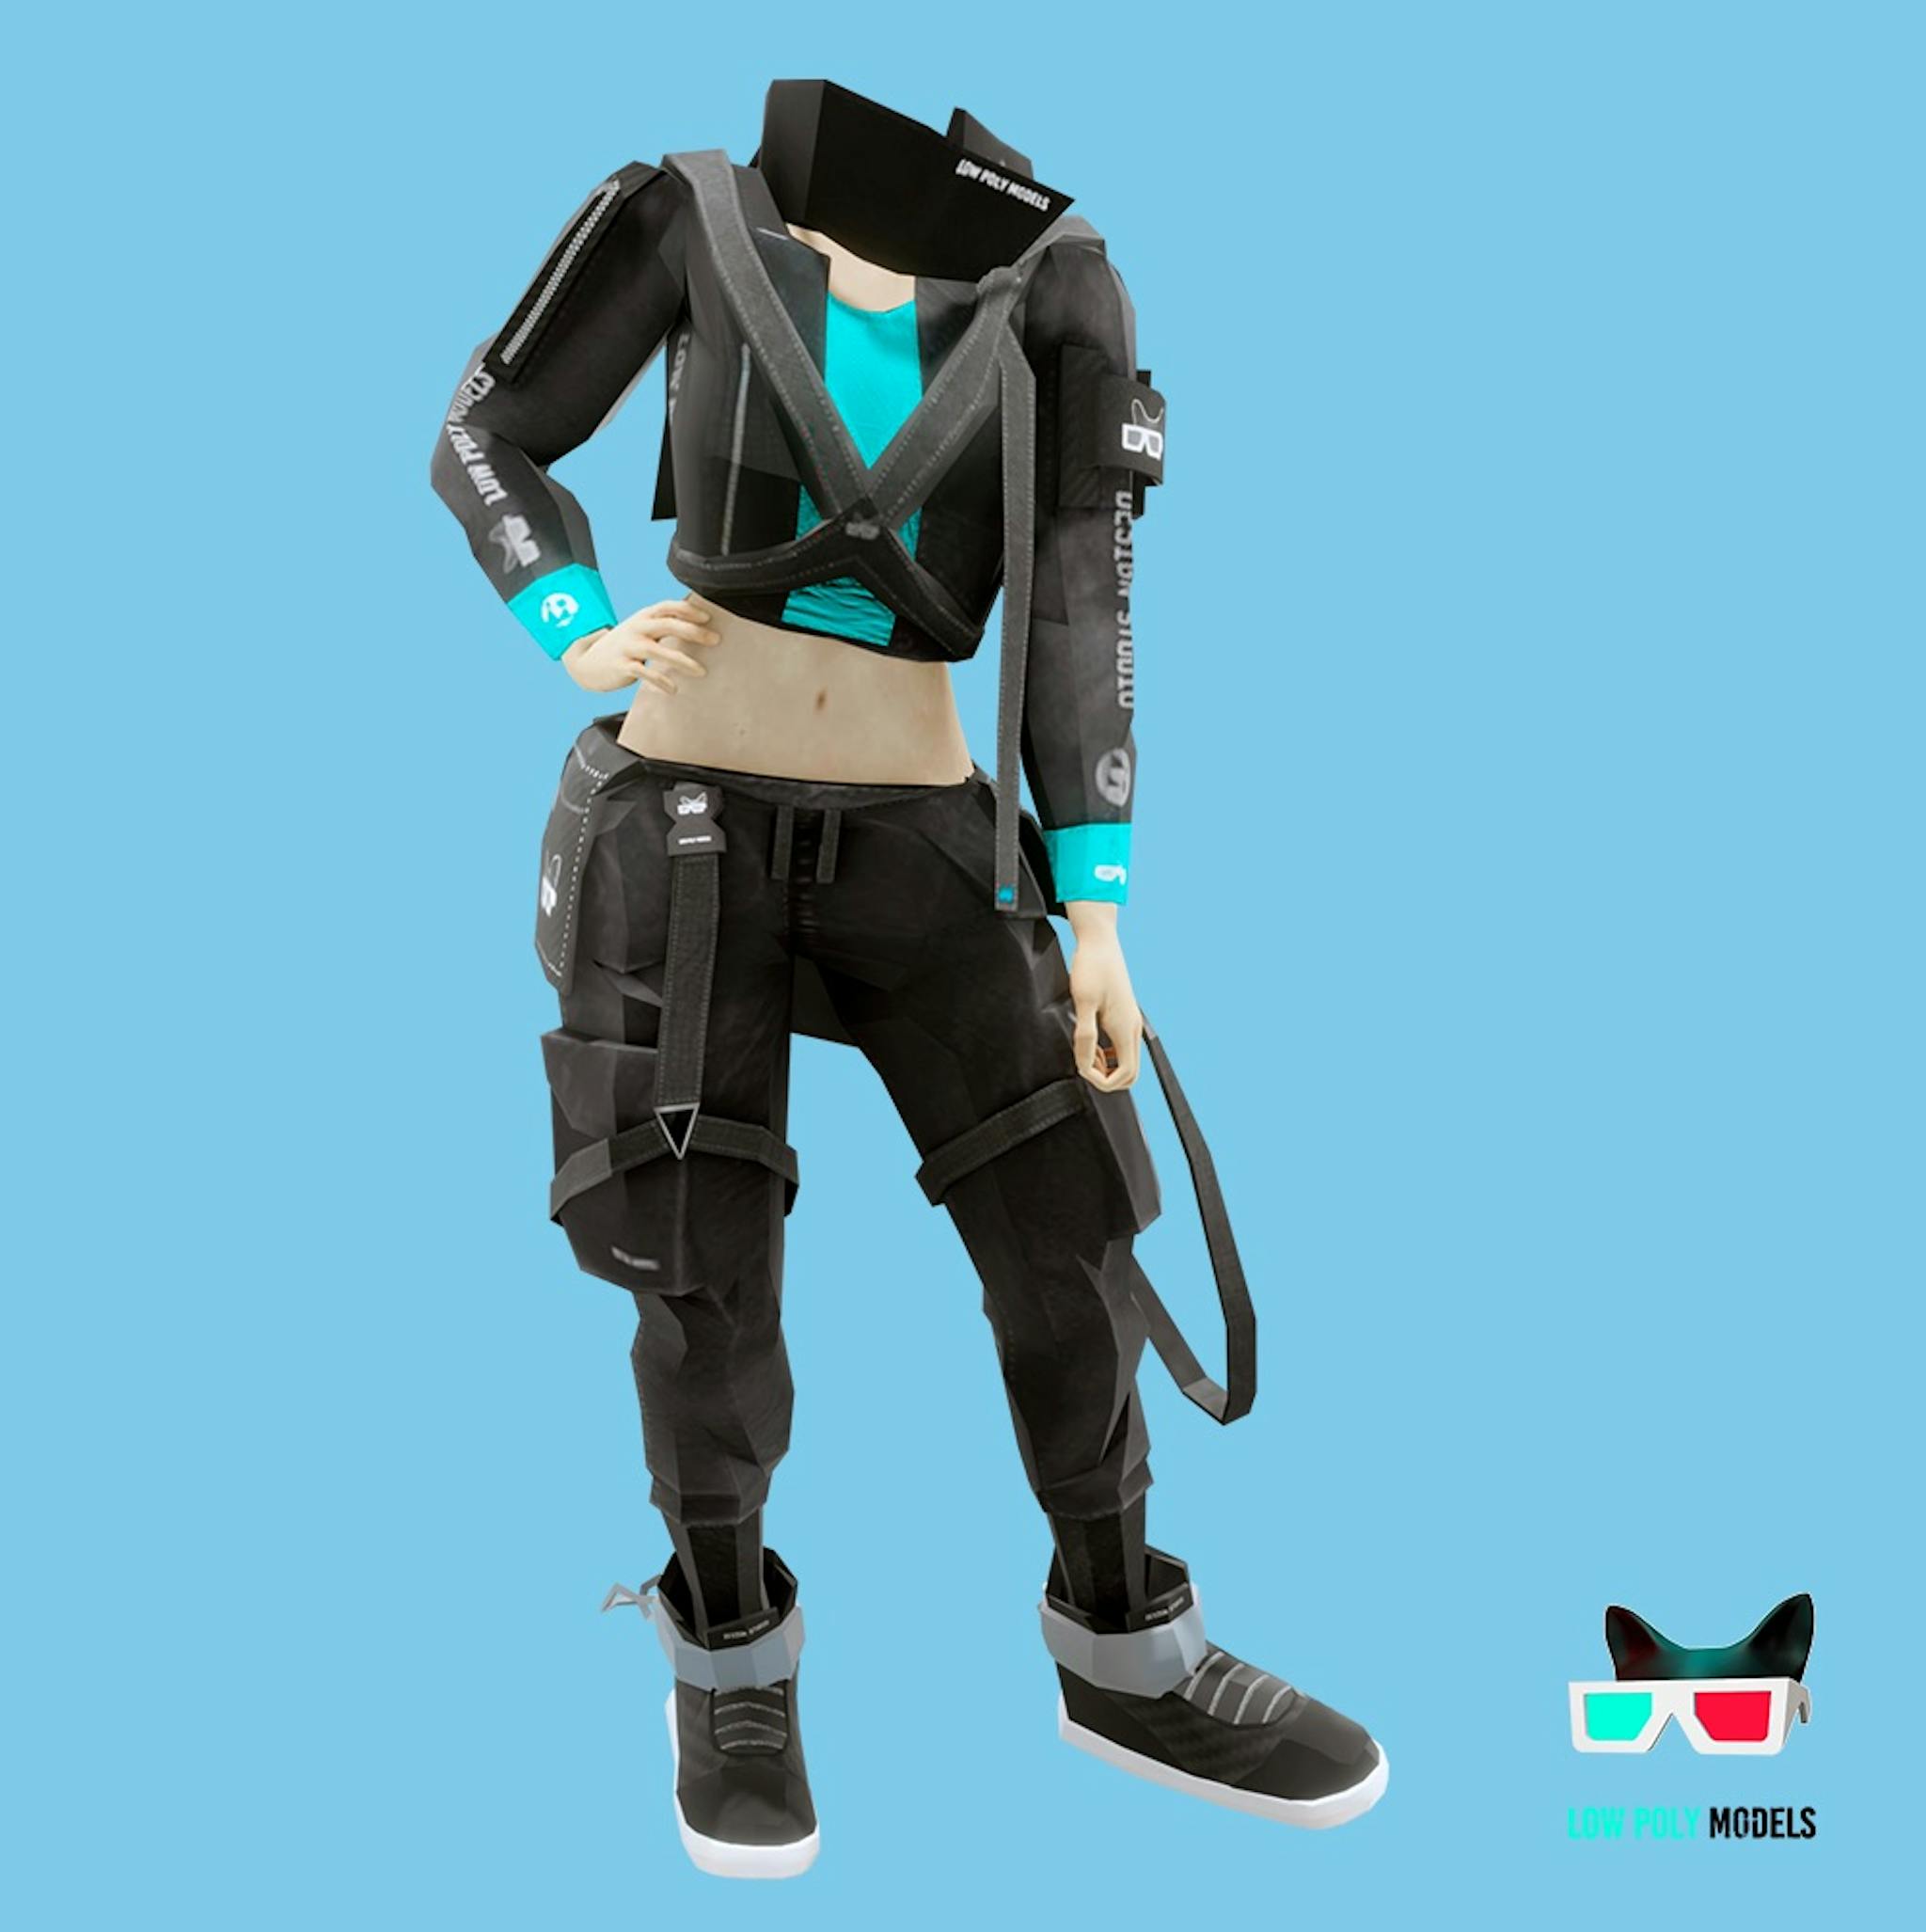 featured image - Digital Fashion from a Techno-Artistic Perspective: KJ from LOW POLY MODELS